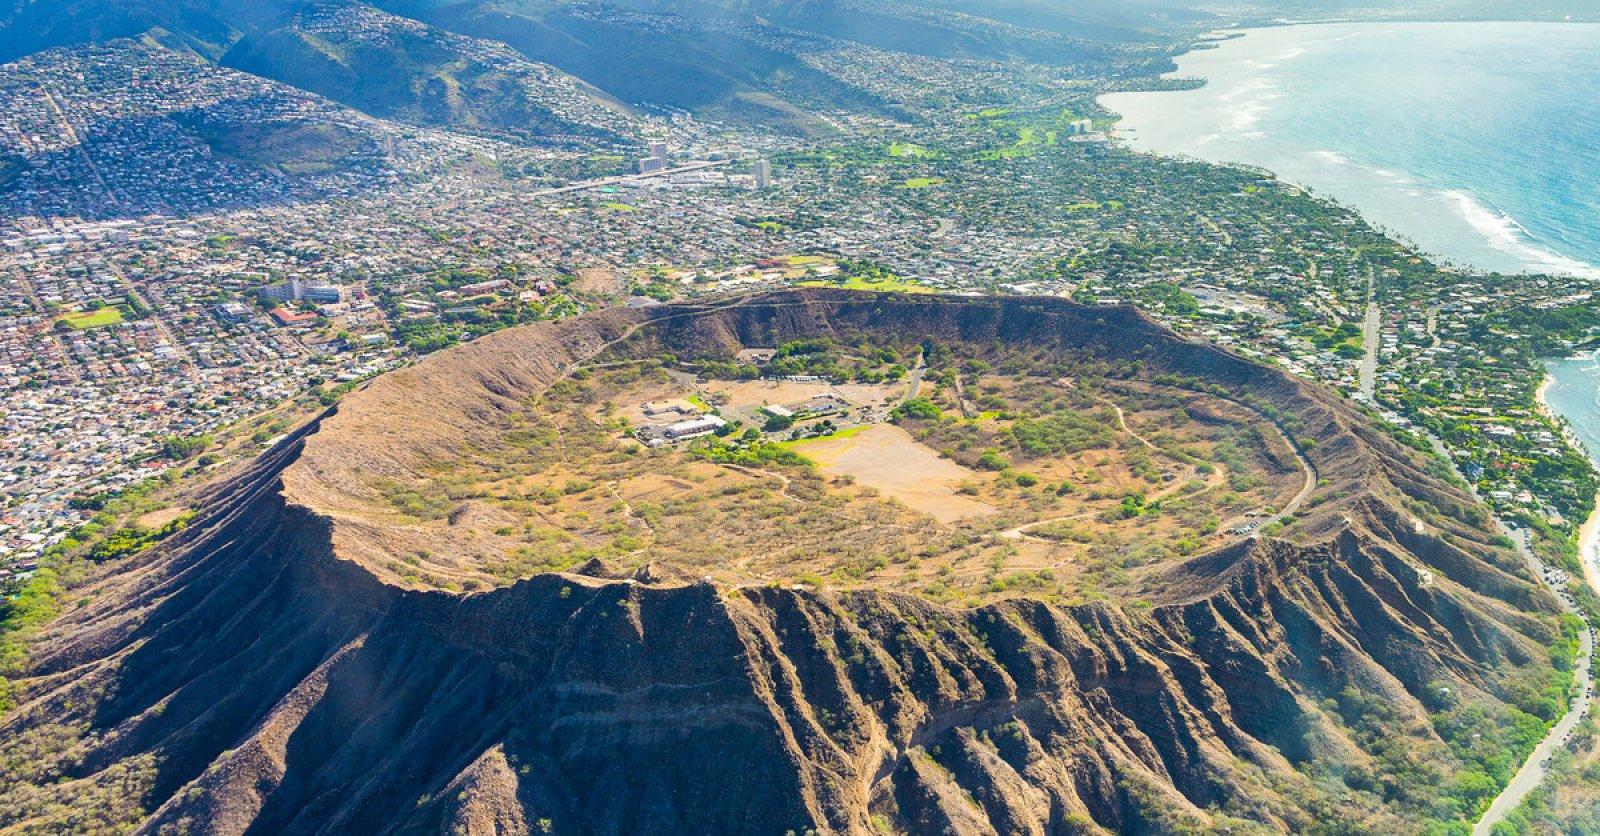 Diamond Head Crater is just miles from Downtown Honolulu